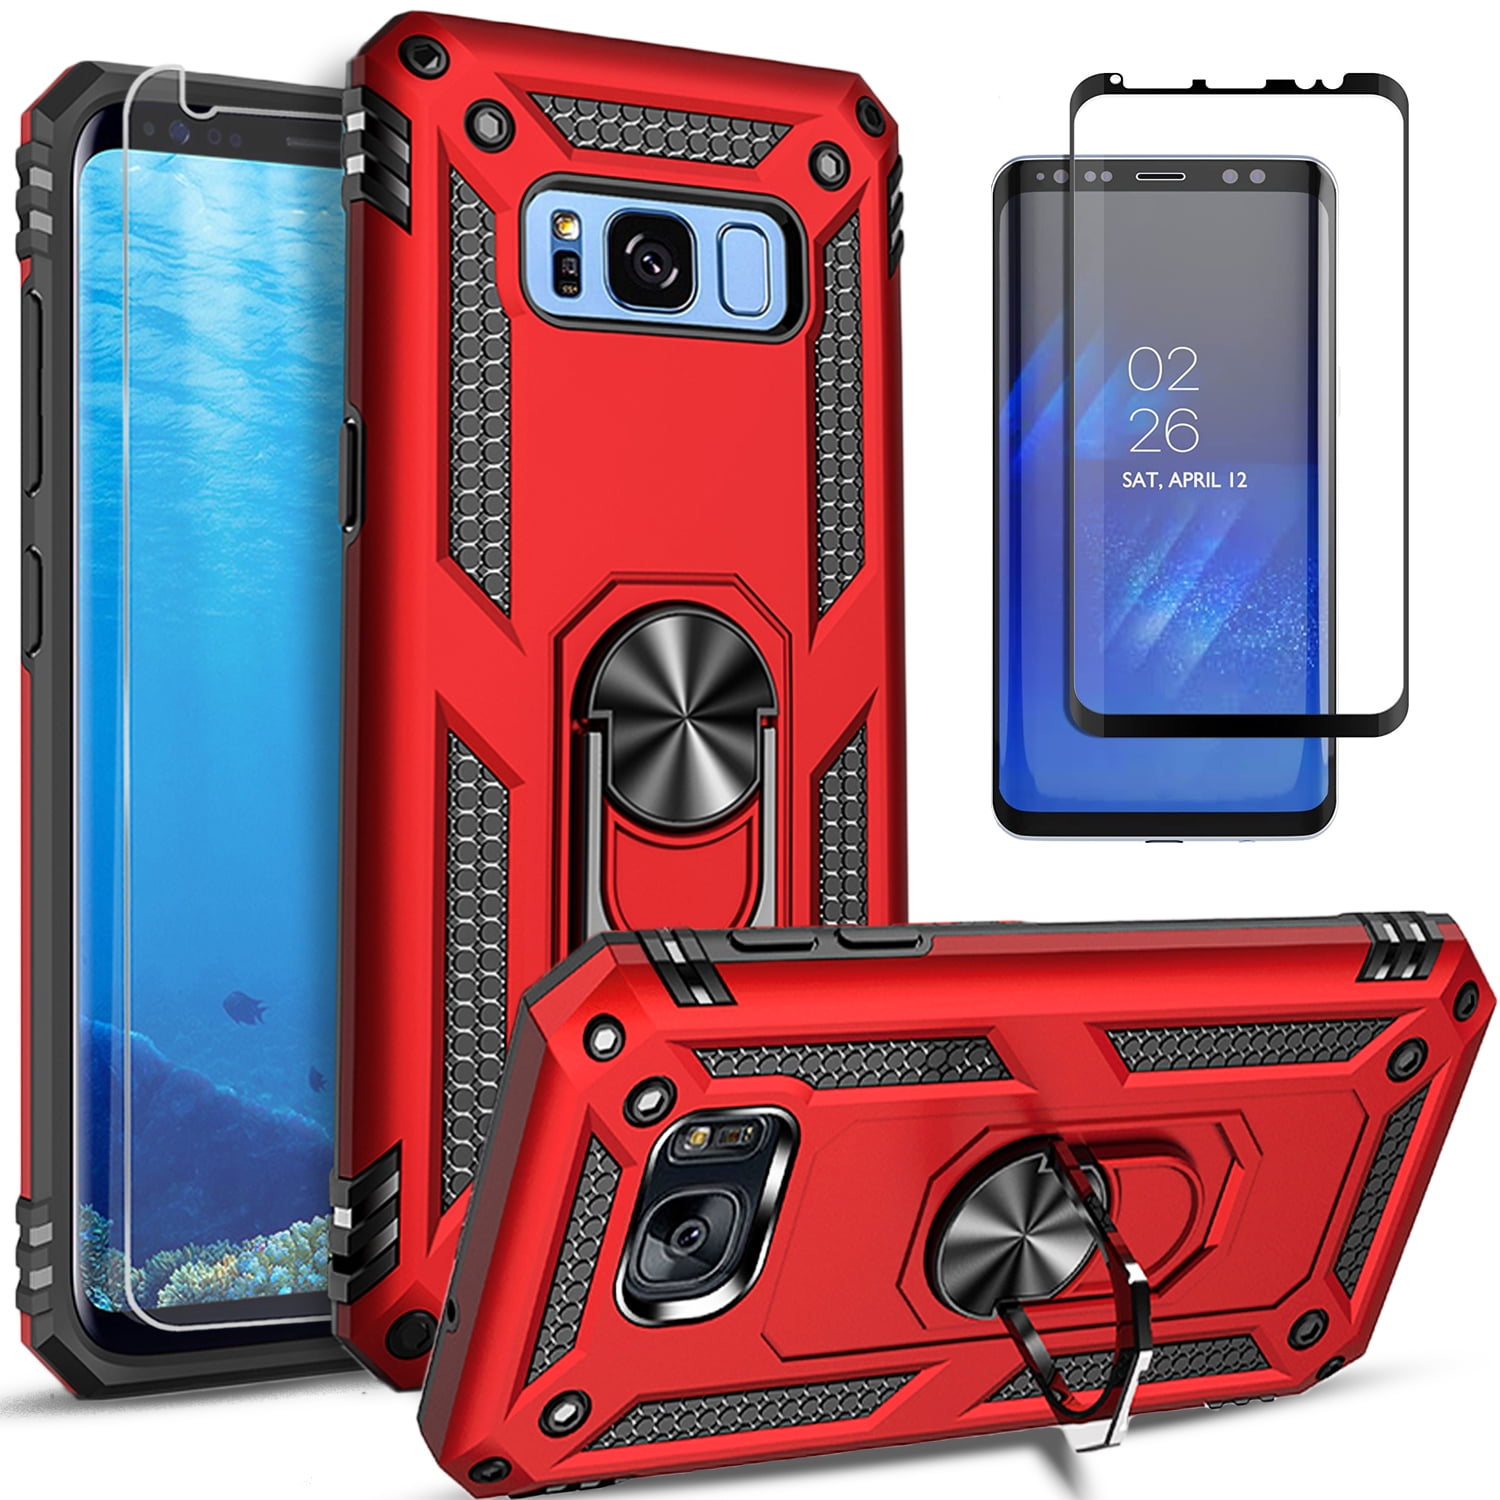 Samsung GALAXY S20 FE Case, With [Tempered Glass Screen Protector  Included], STARSHOP Drop Protection Ring Kickstand Cover- Ink Blue